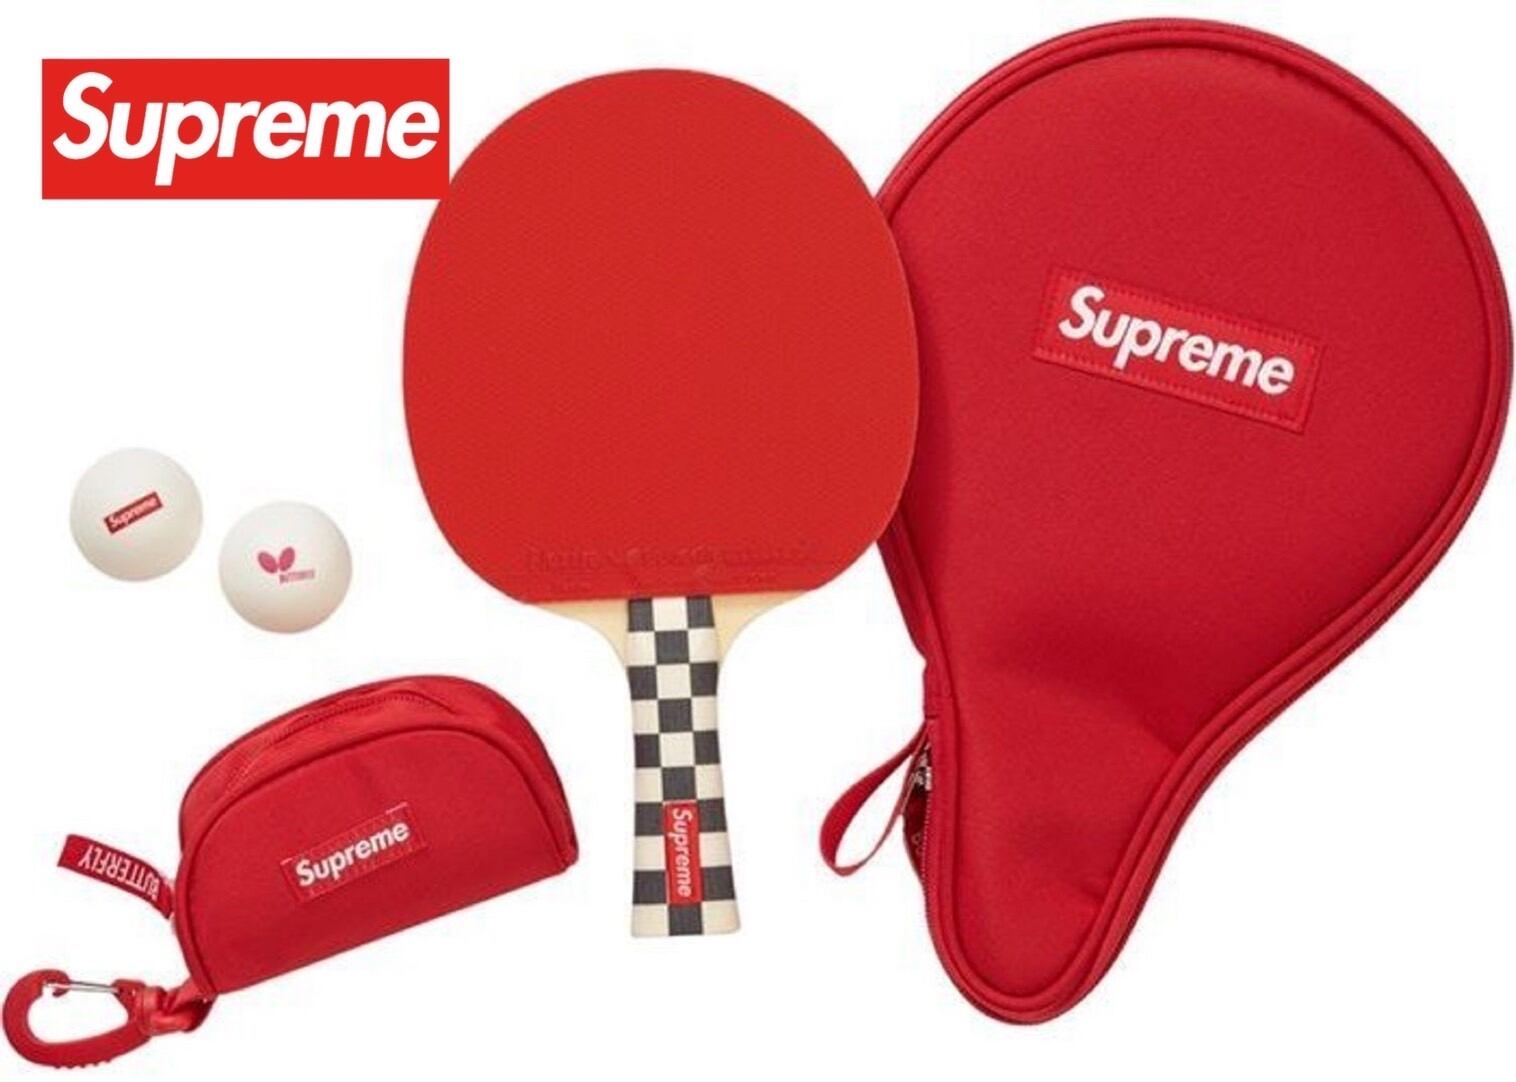 Supreme シュプリーム 19AW テーブルテニスラケットセット 卓球セット 